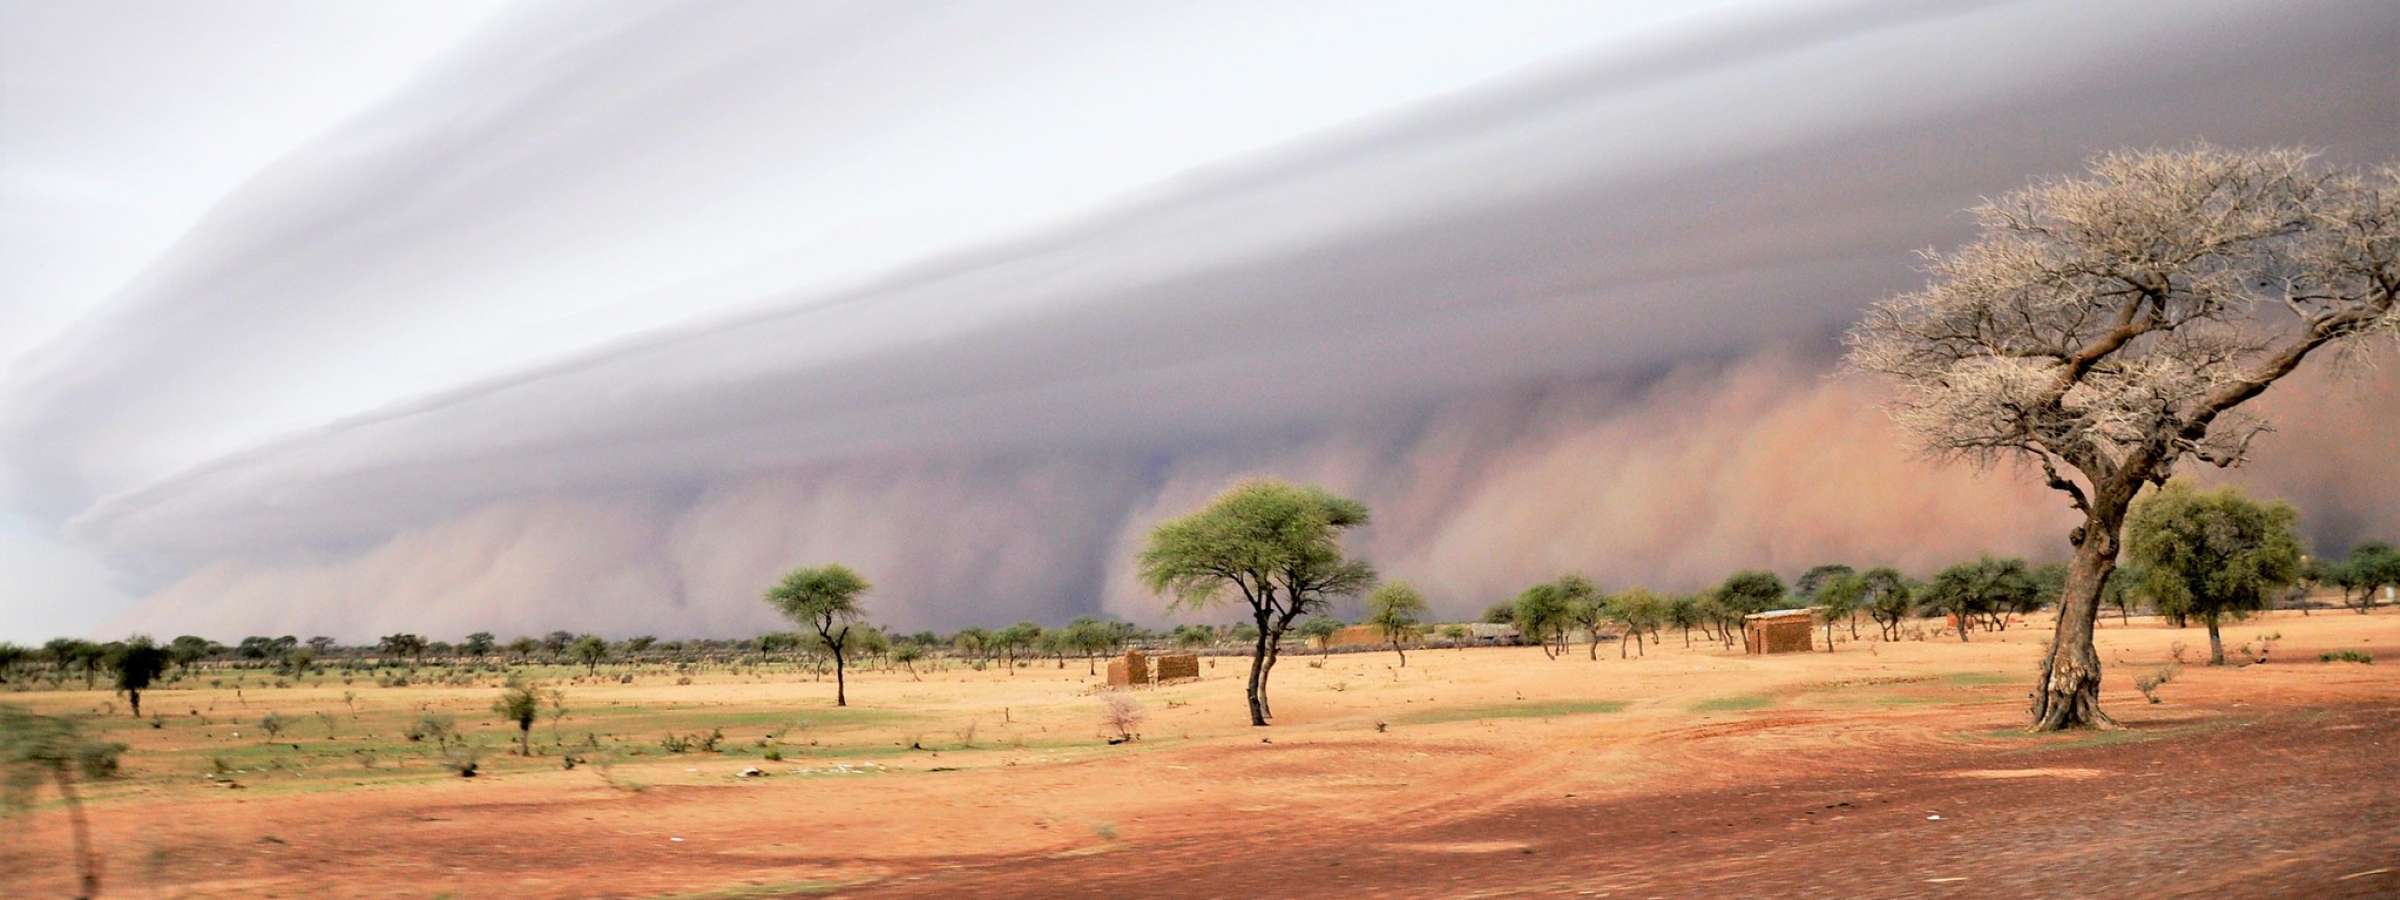 Wind and dust before drops of water